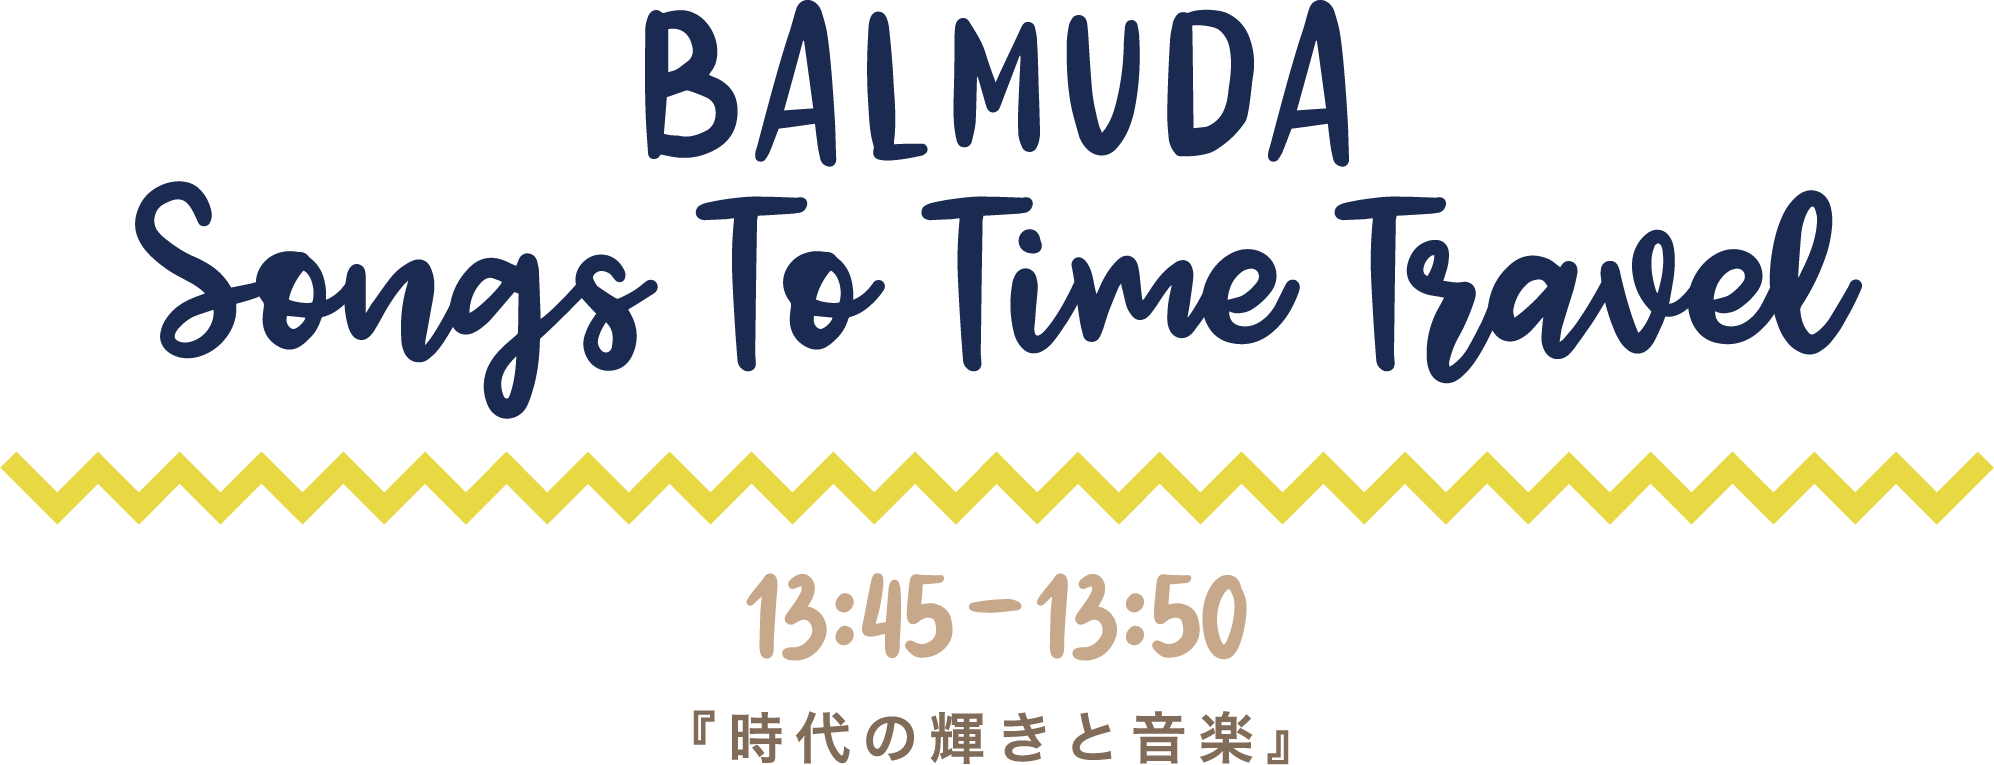 BALMUDA SONGS TO TIME TRAVEL